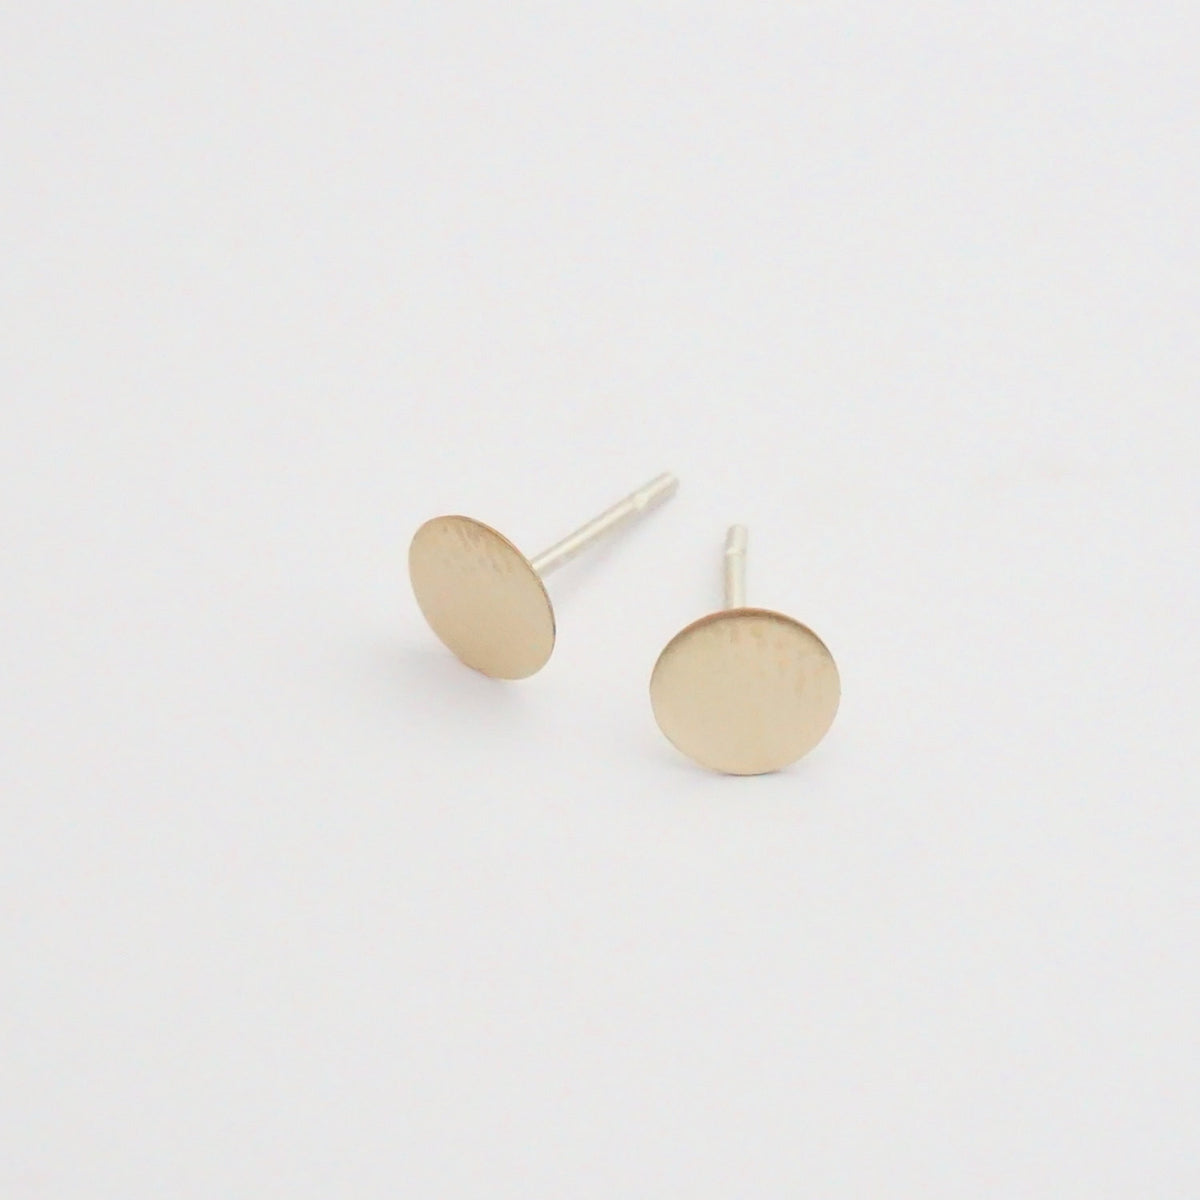 Contemporary Styled, Hand-Made Flat Circular Gold Colored Brass Studs - 0121 - Virginia Wynne Designs